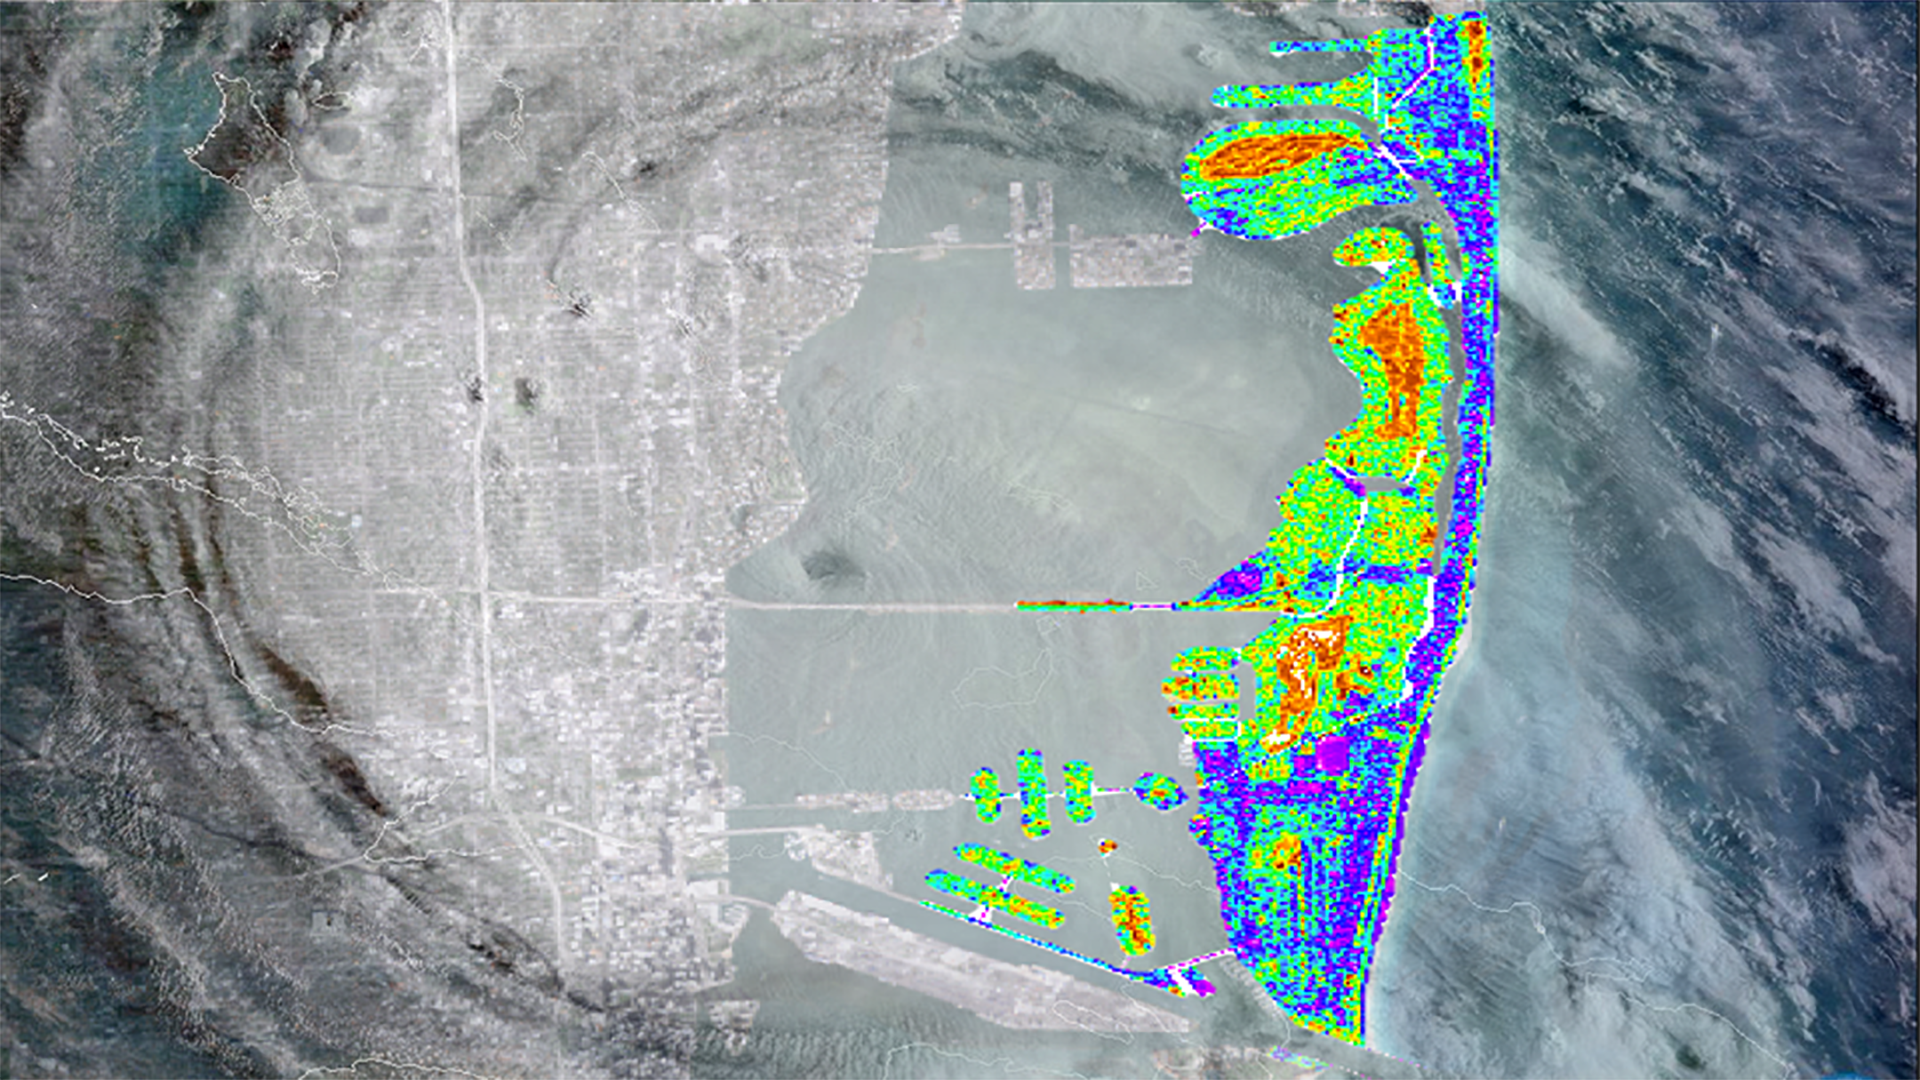 Utilizing NASA Earth Observations to Assess Vegetation Resiliency and Water Quality Concerns to Enhance Green Infrastructure Plans in Light of Extreme Weather Events